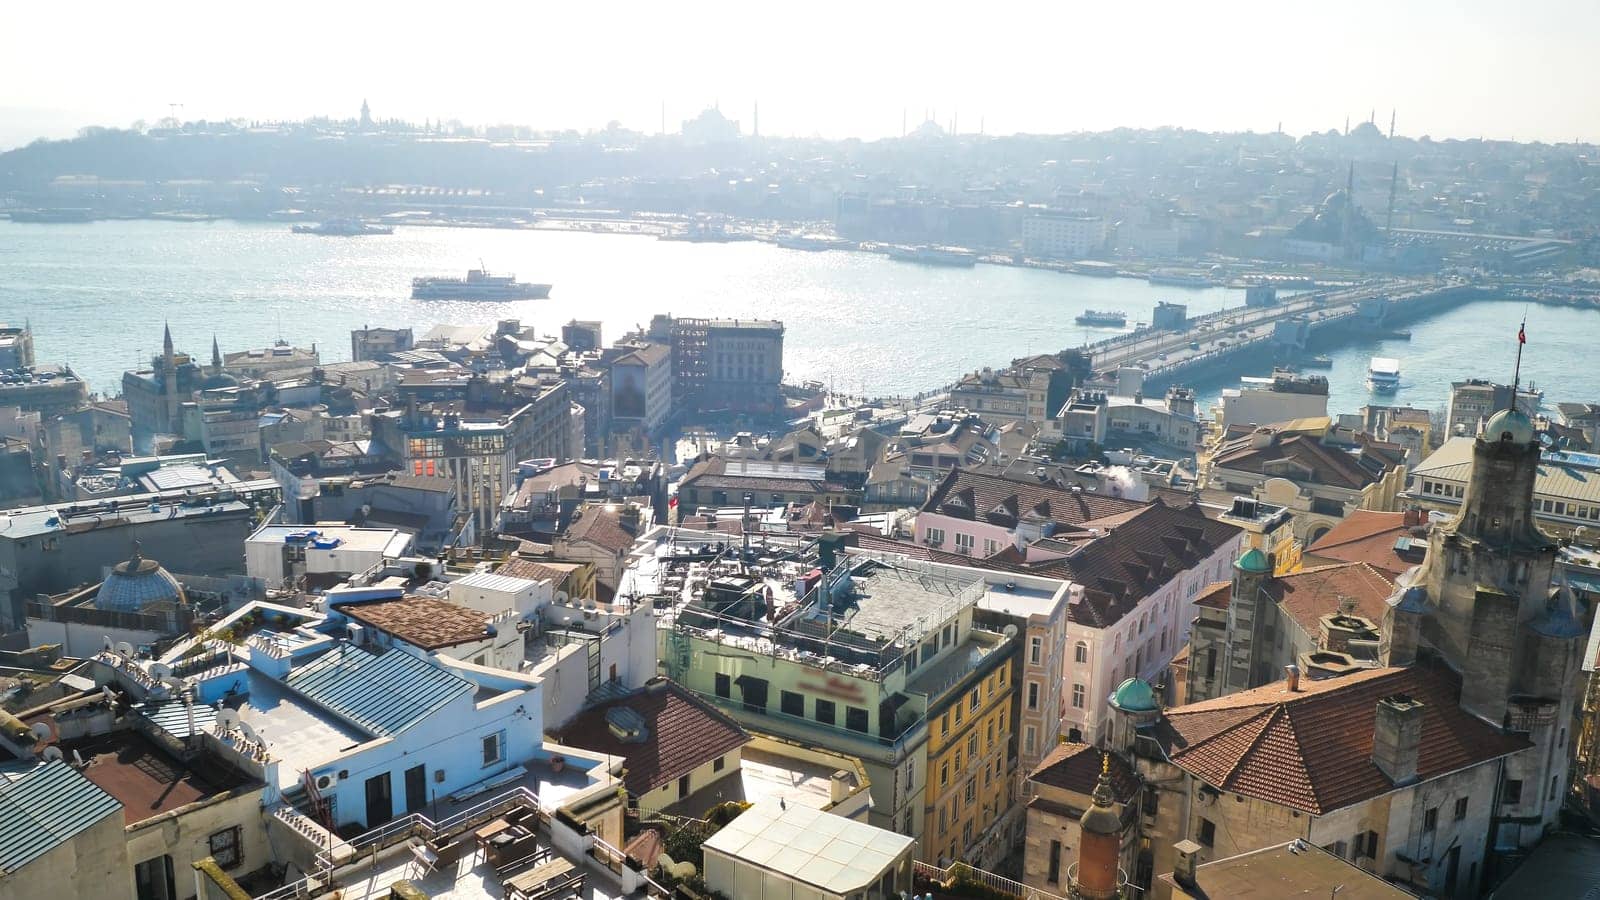 Panorama of the city of Istanbul from a height